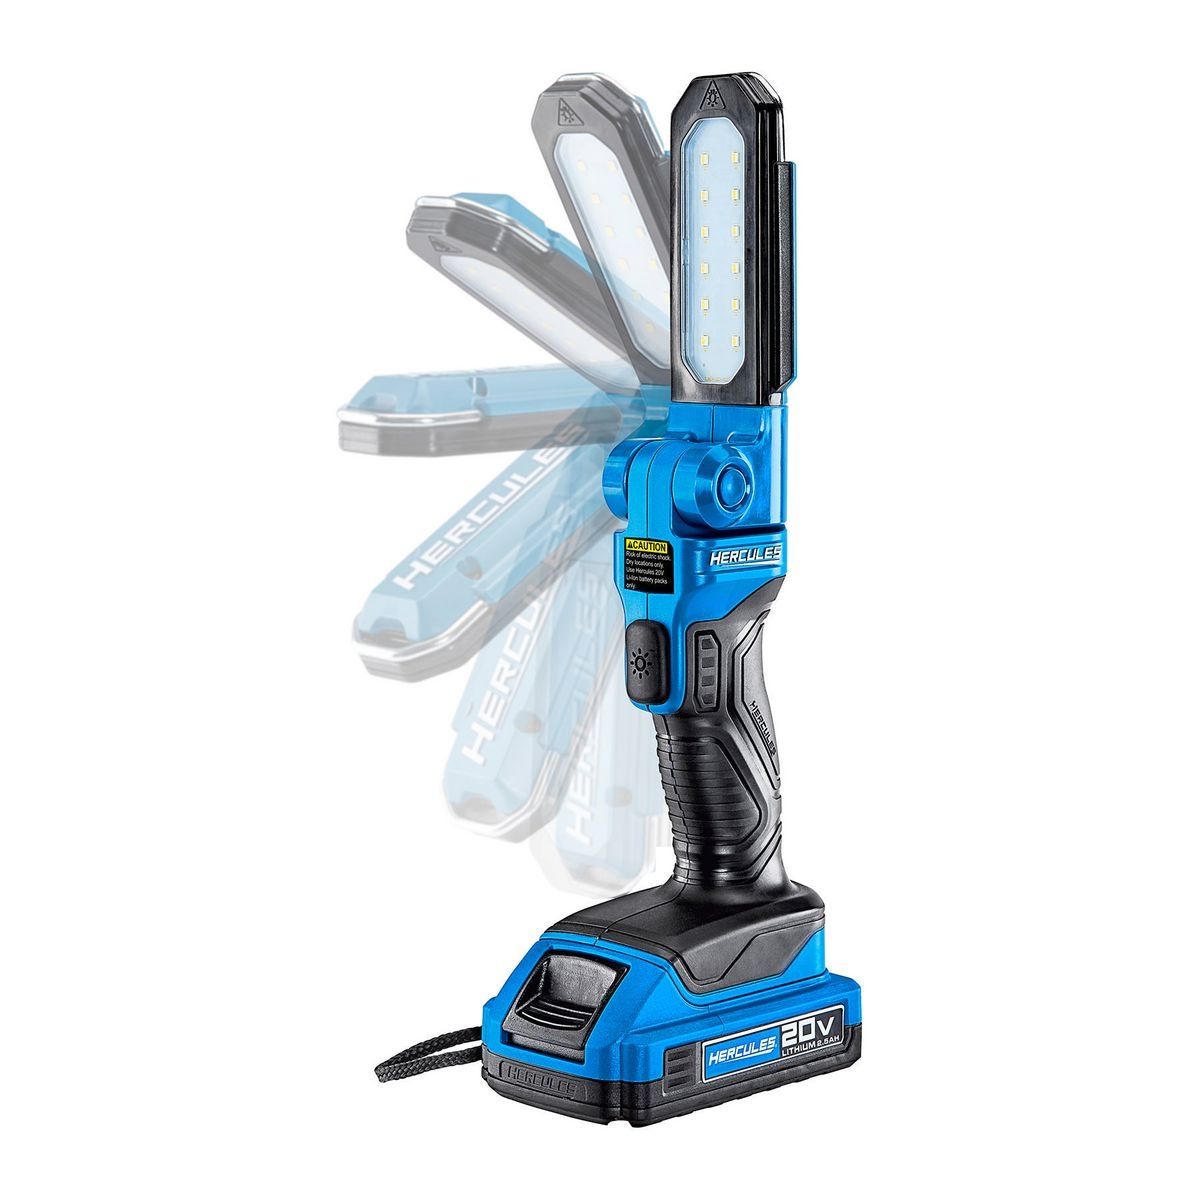 Hercules 20V Cordless 280 Lumen Stick Light – Tool Only – The Detail Culture